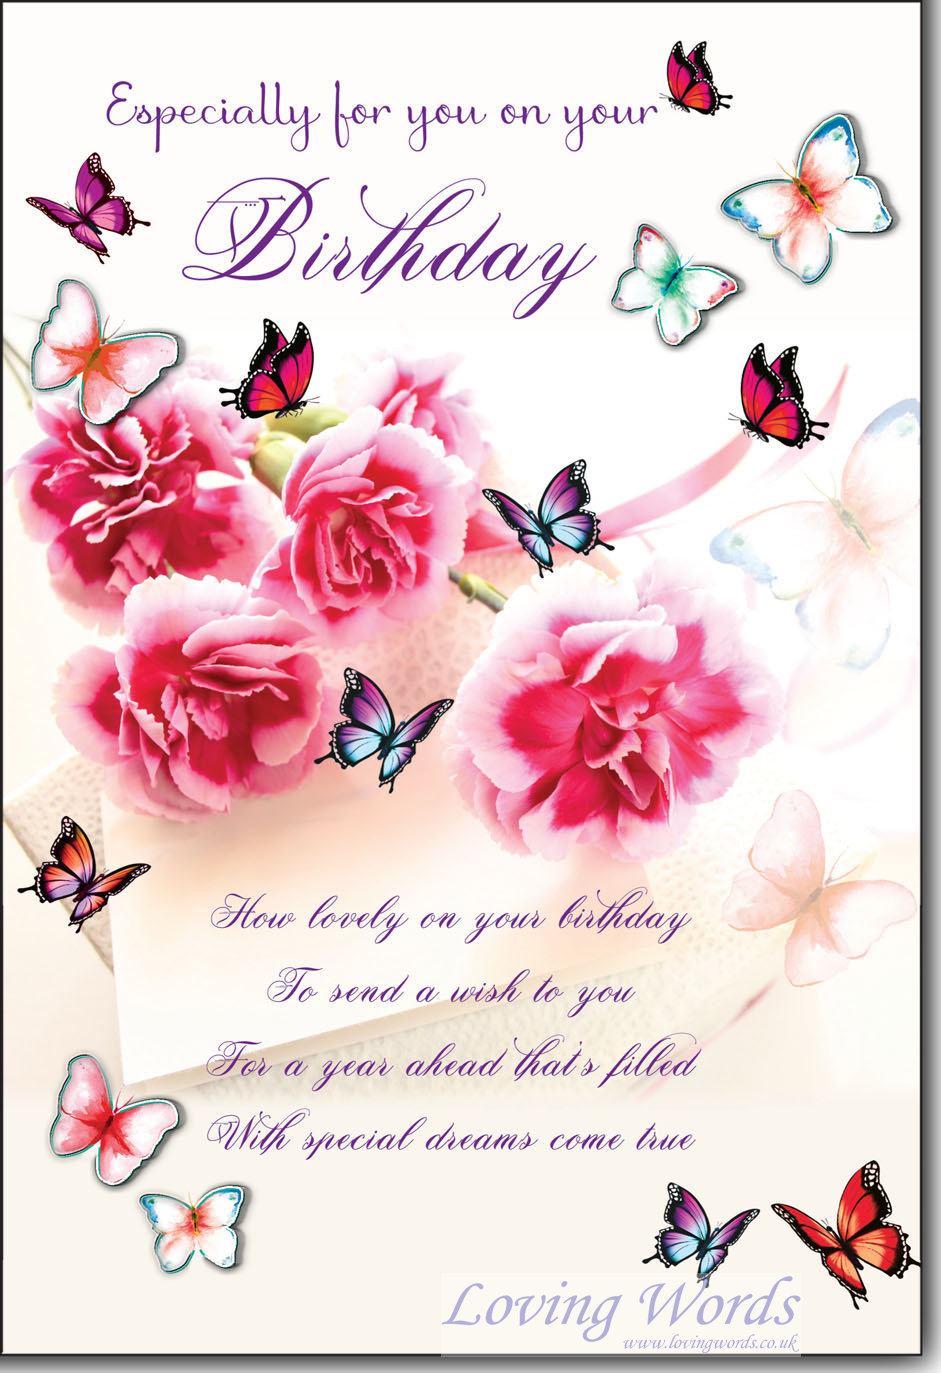 On your Birthday | Greeting Cards by Loving Words